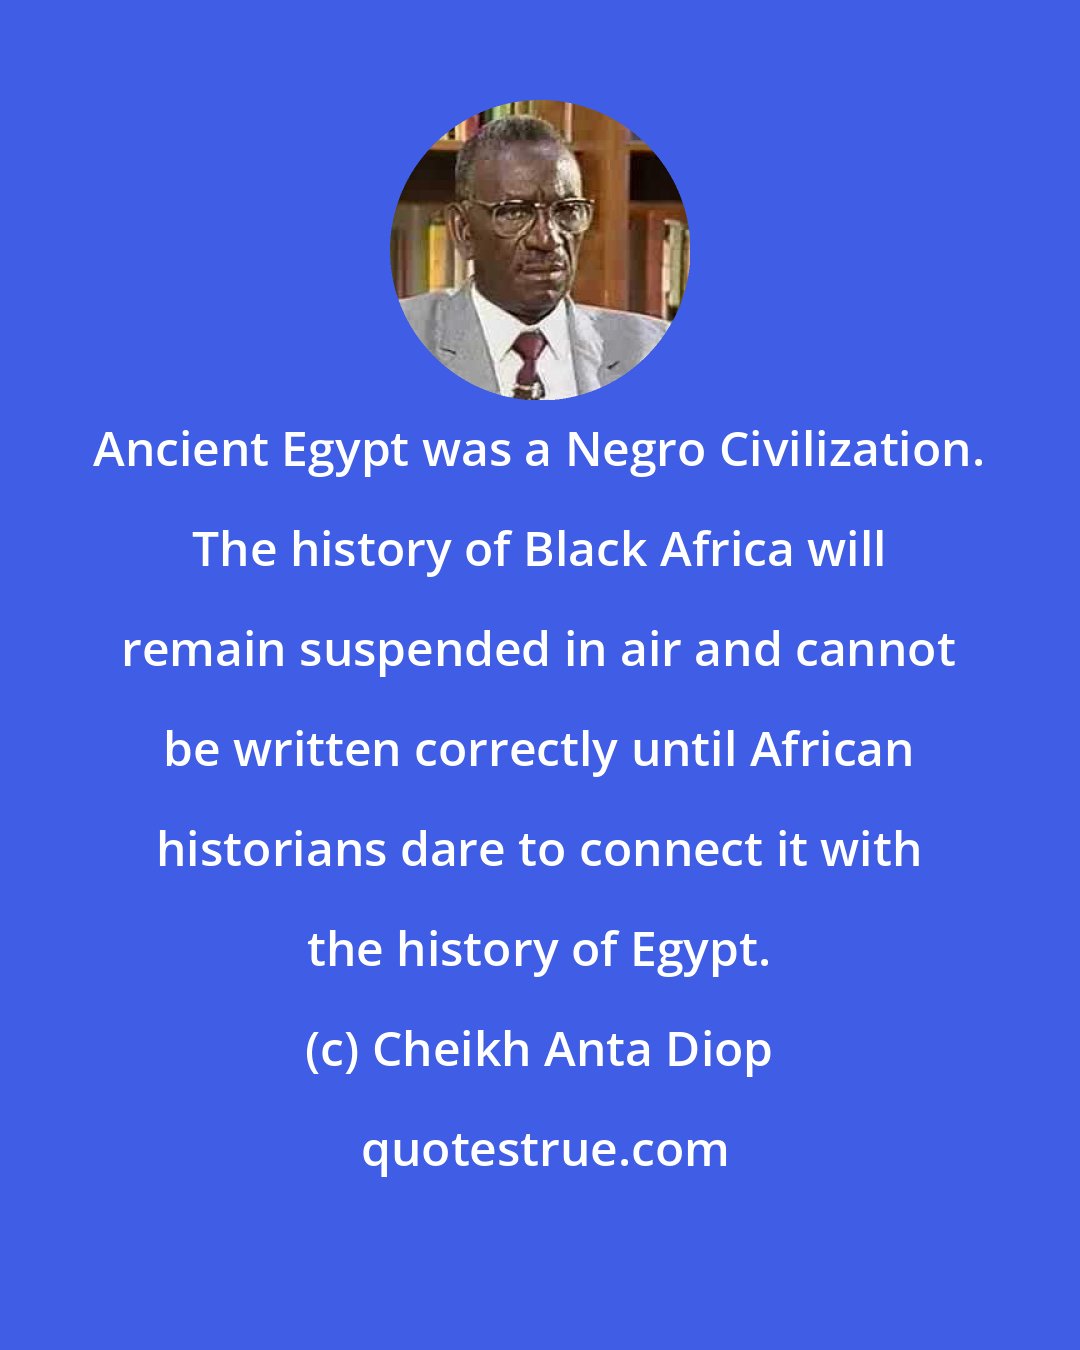 Cheikh Anta Diop: Ancient Egypt was a Negro Civilization. The history of Black Africa will remain suspended in air and cannot be written correctly until African historians dare to connect it with the history of Egypt.